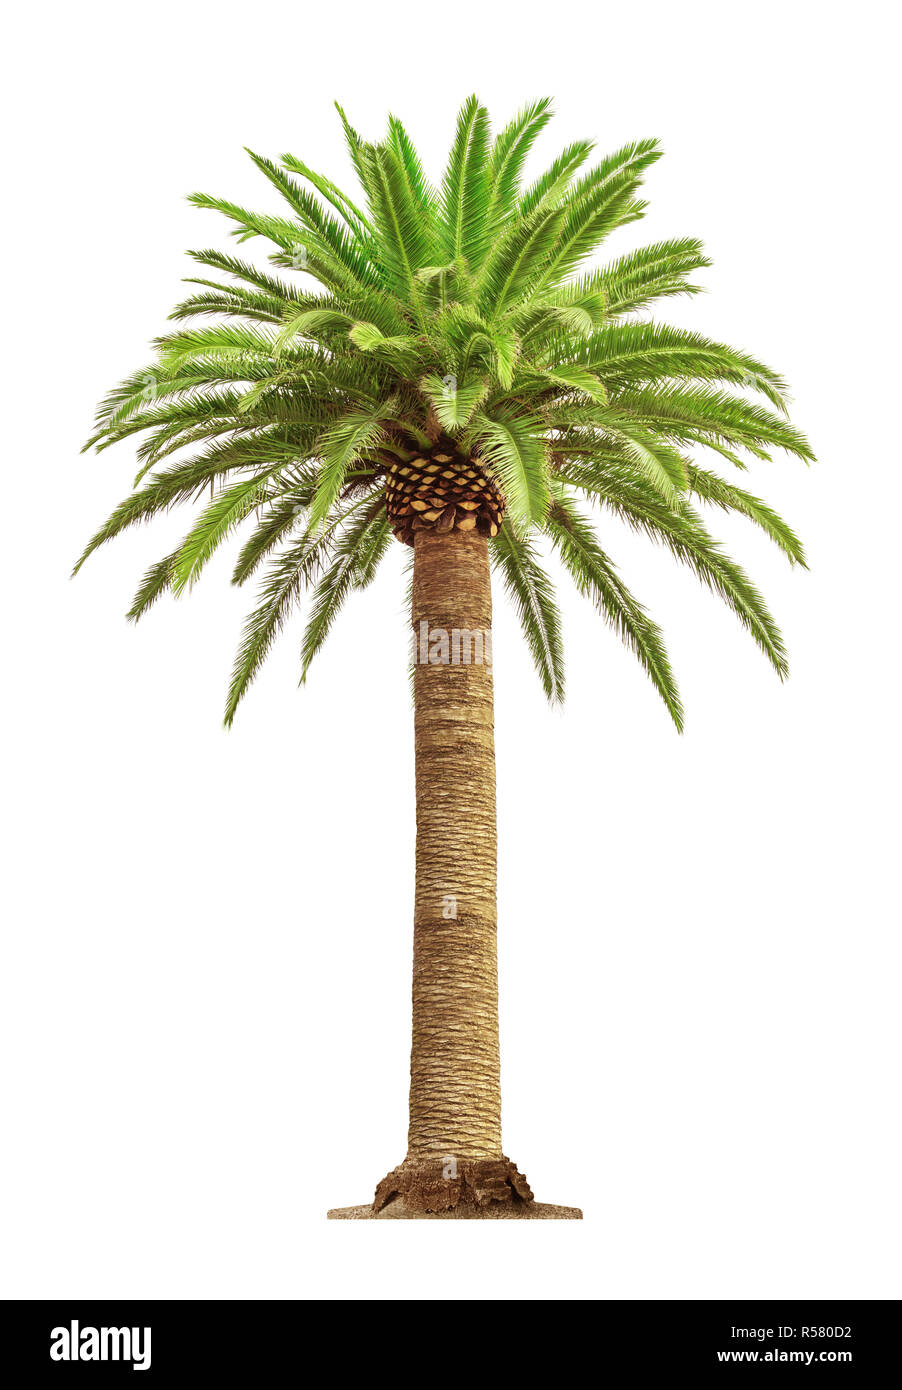 Green beautiful palm tree isolated on white background Stock Photo